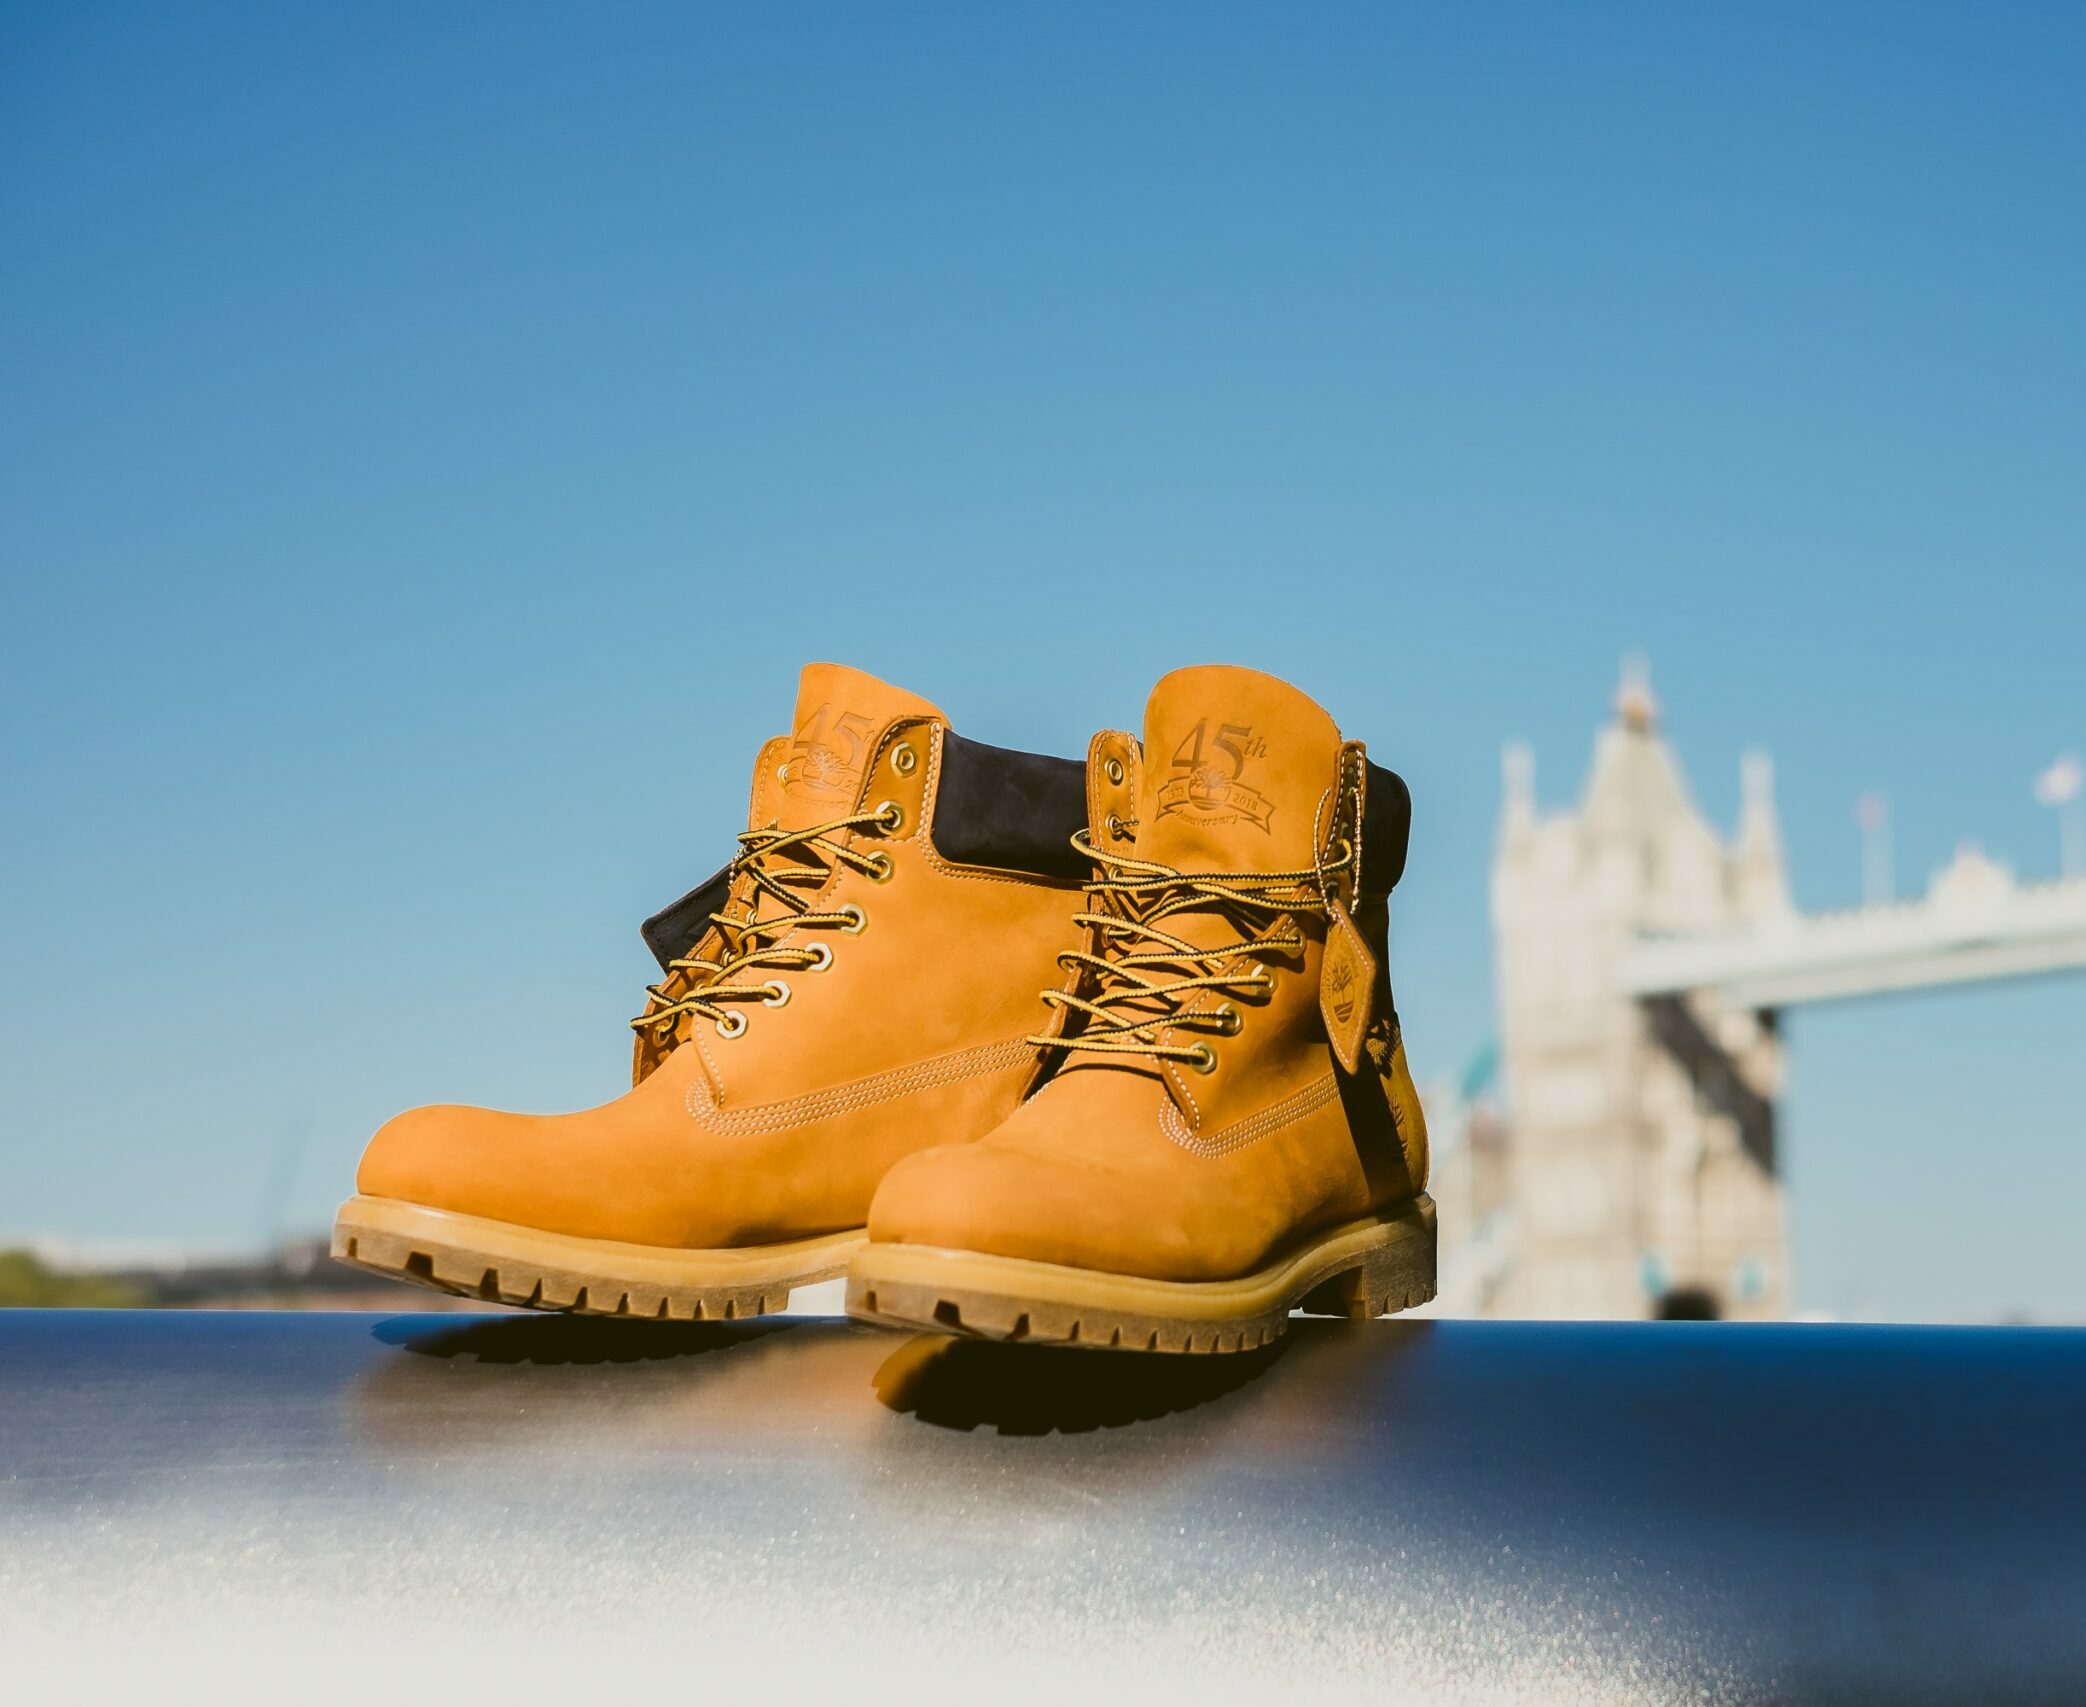 Timberland Photo by Clem Onojeghuo